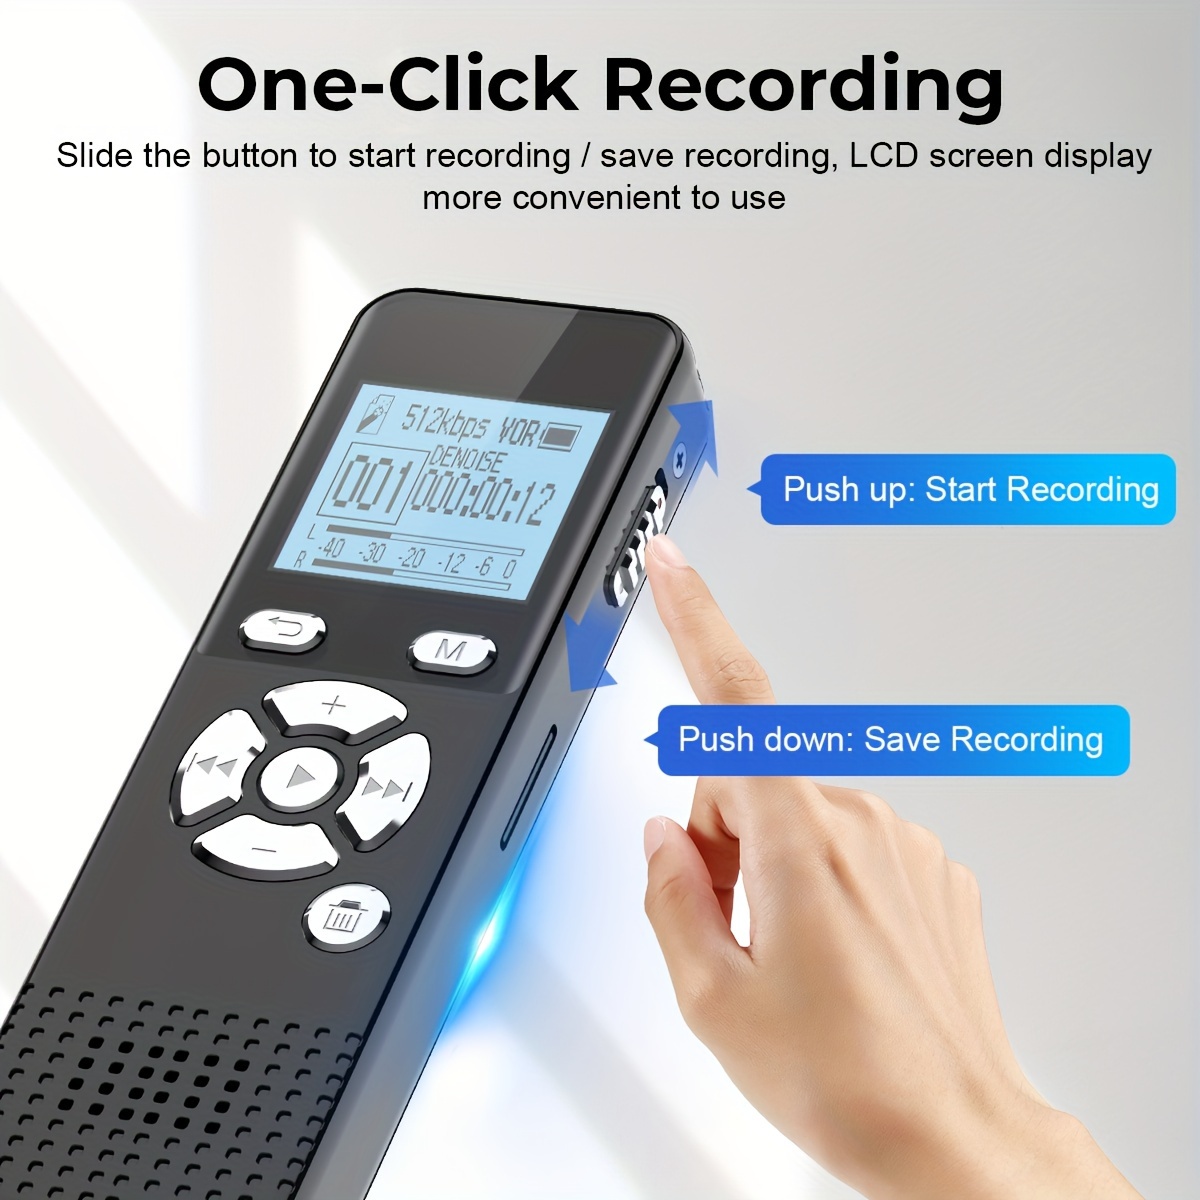 

Digital Voice Activated Recorder With Playback - 72gb Audio Recording Device With 5300 Hours Recording Time - Sound Tape Recorder Listening Devices For Lecture With Usb Microphone Password